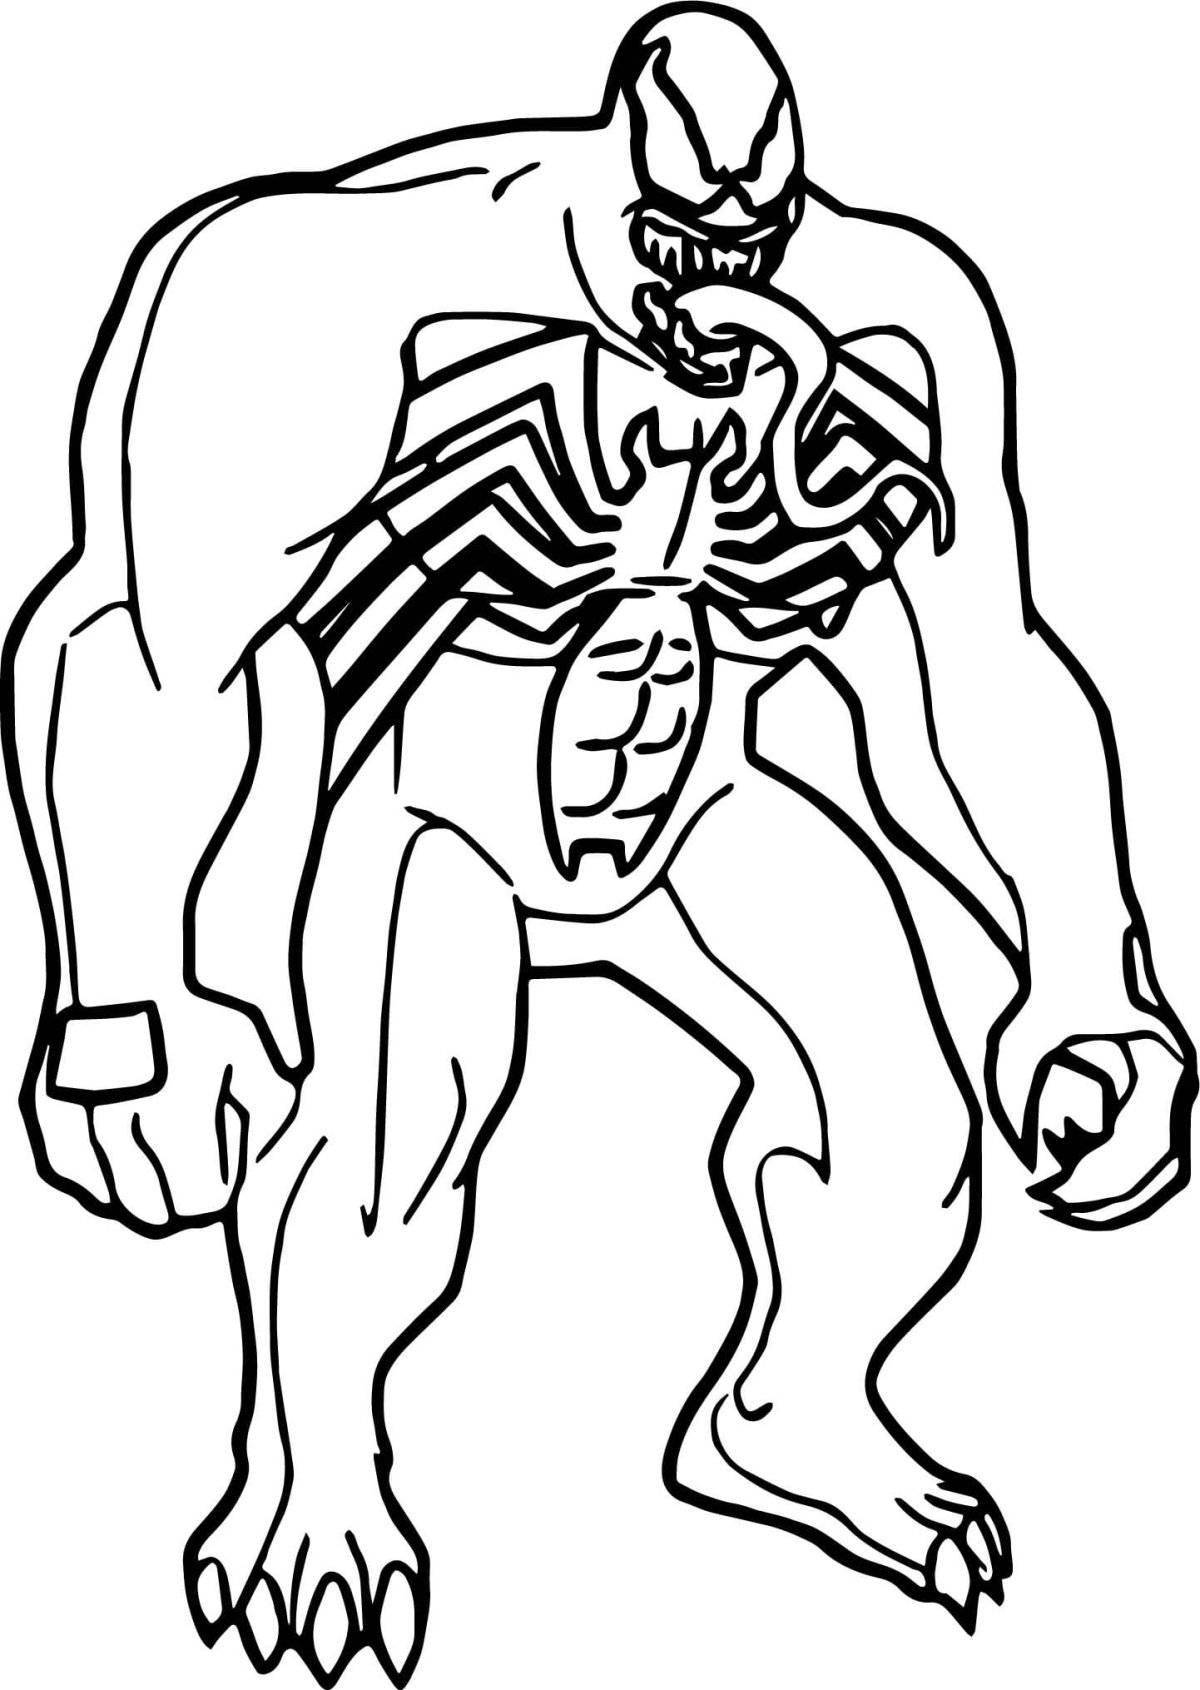 Great venom coloring book for kids